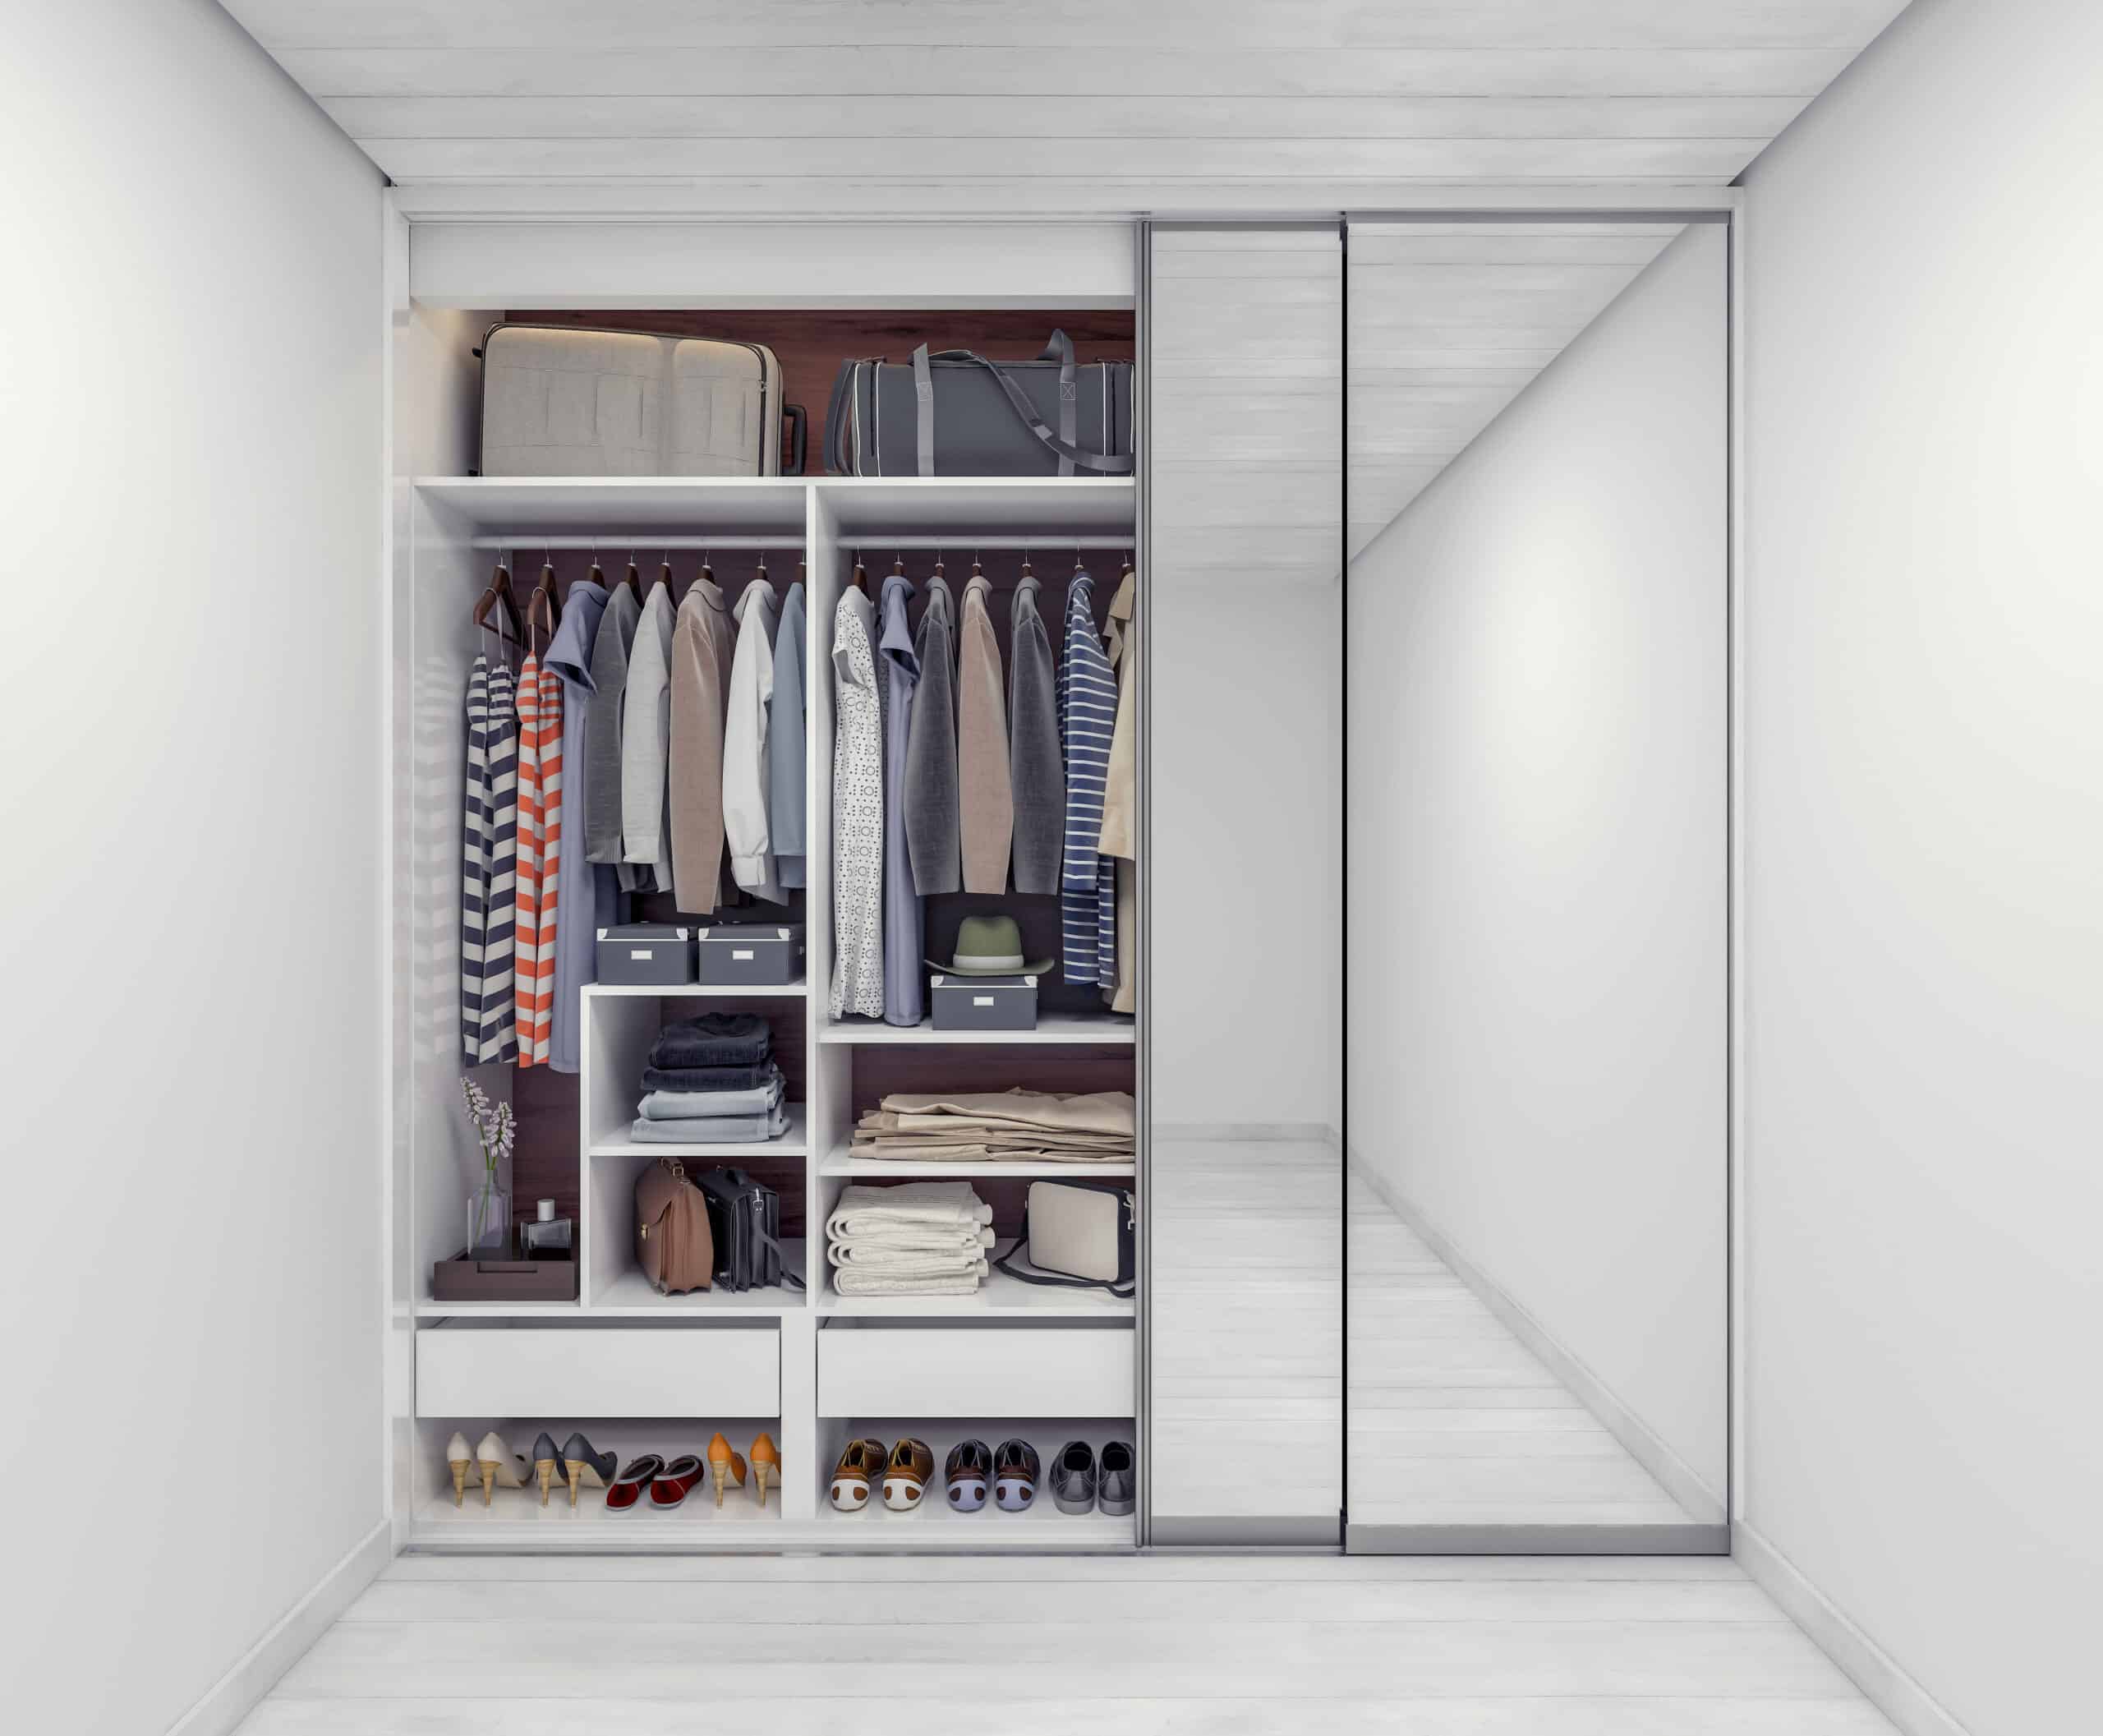 Shelves in a closet where you can store luggage plus clothes.